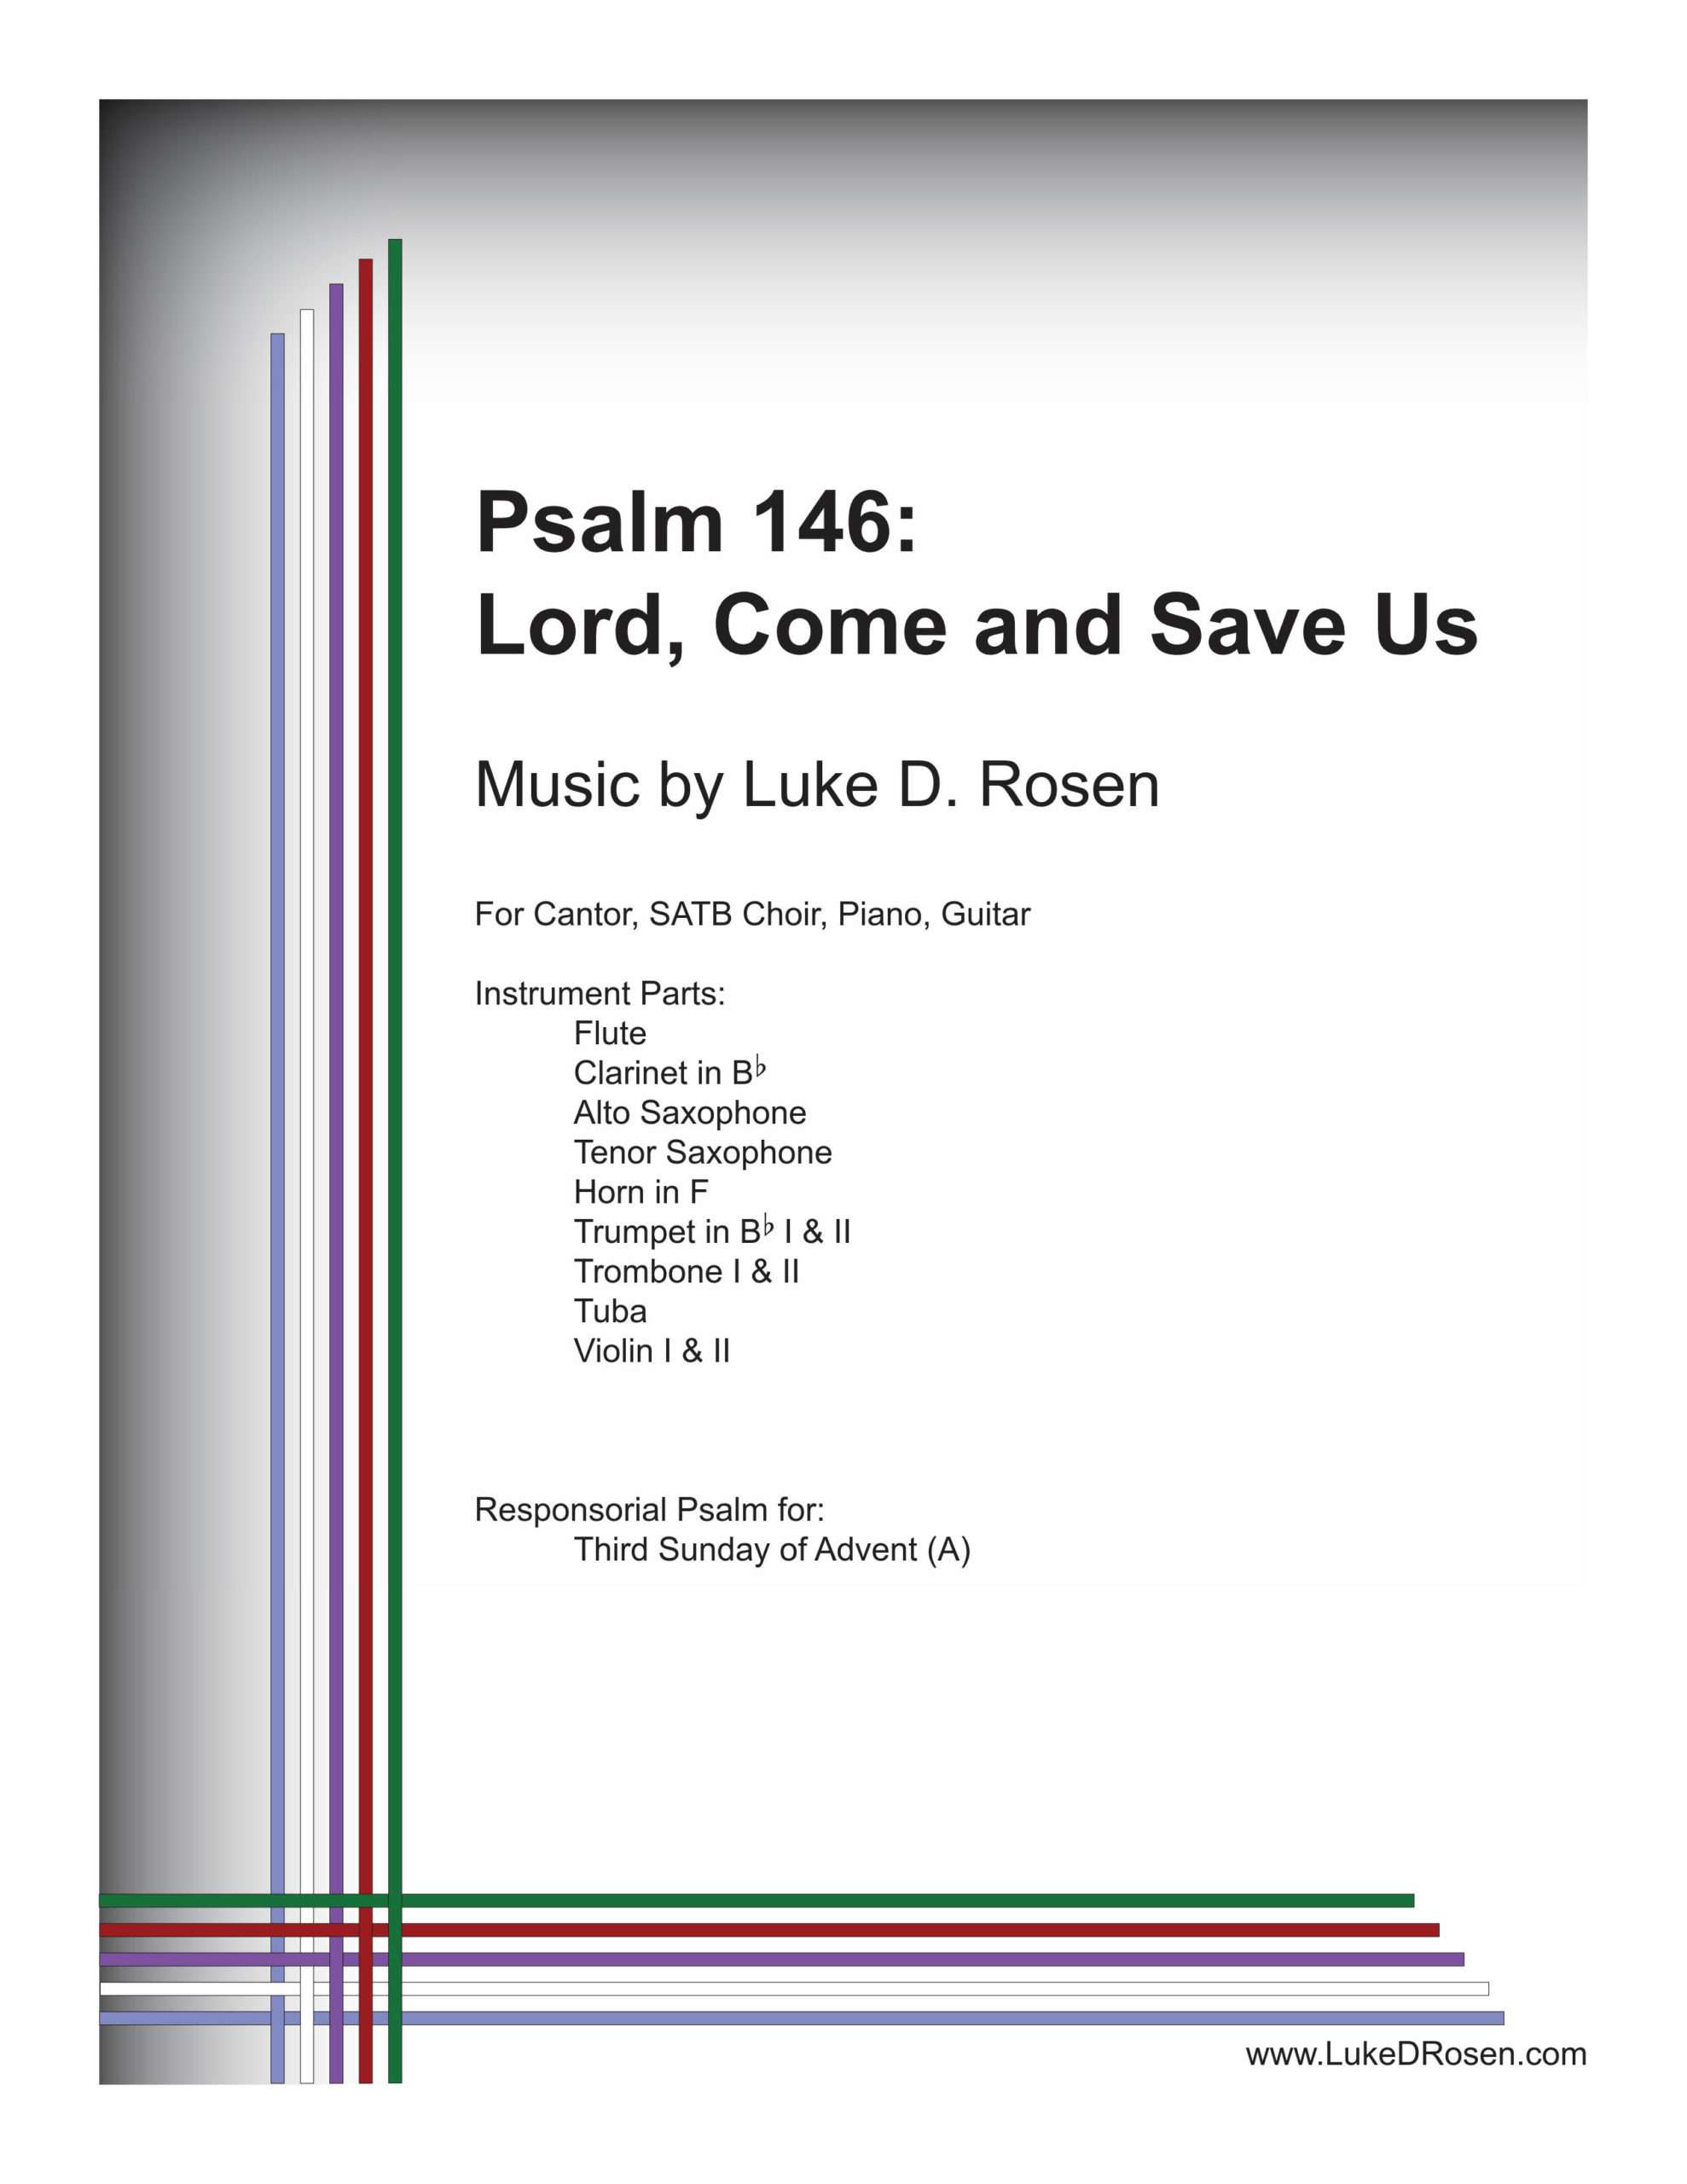 Psalm 146 – Lord, Come and Save Us (Rosen)